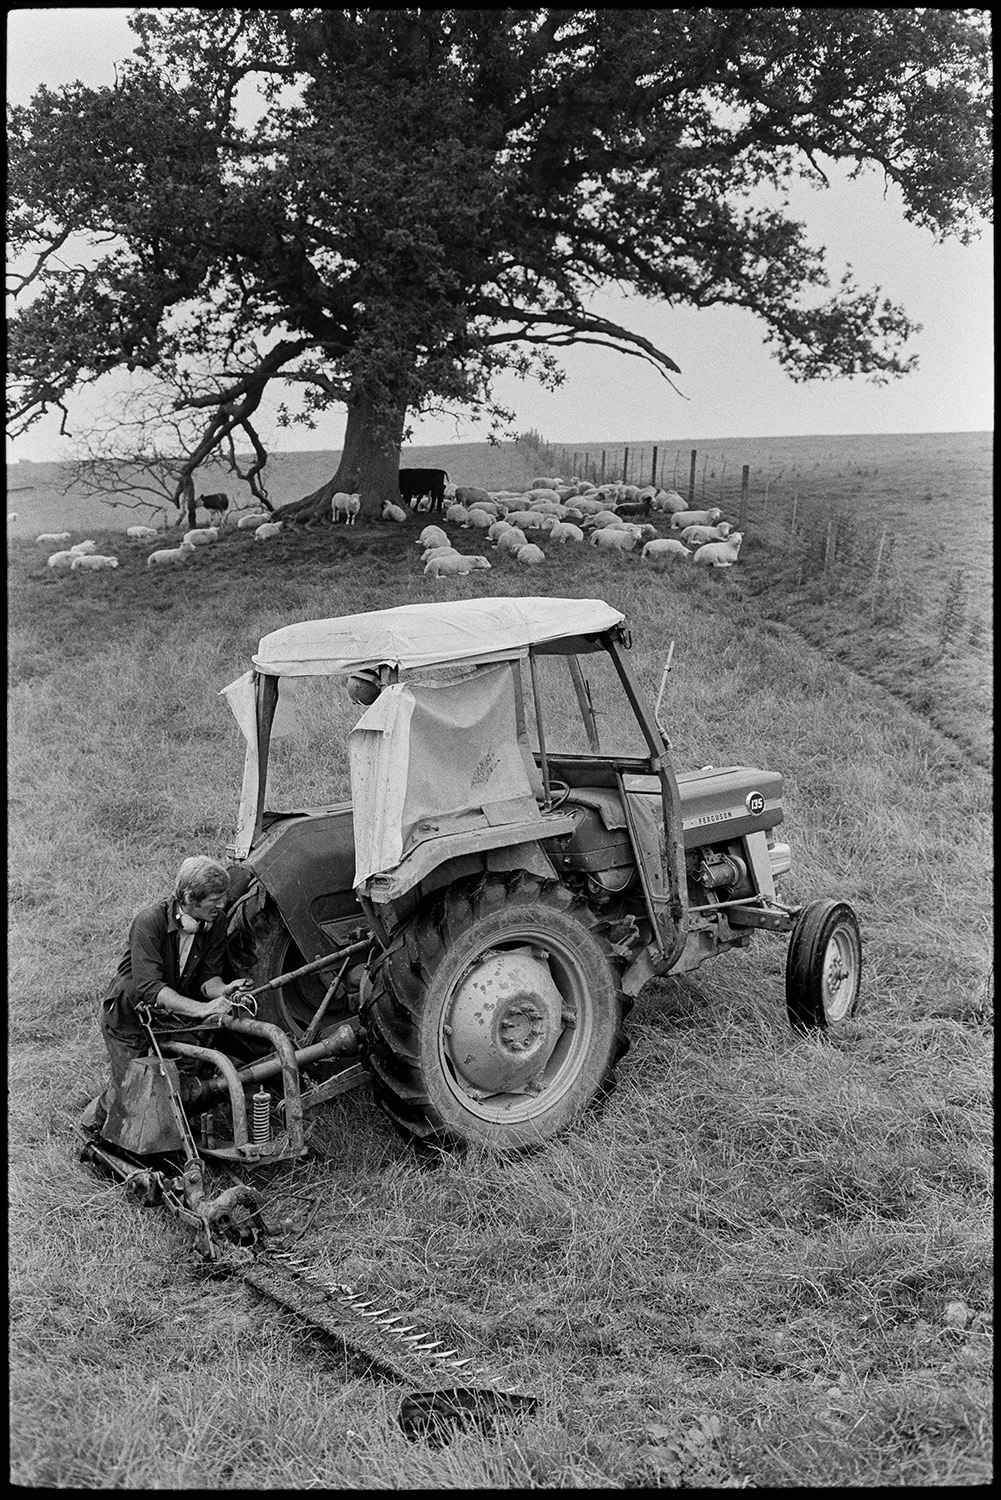 A man attaching a mower to a tractor in a field at Densham, Ashreigney. Sheep can be seen under a tree in the background.